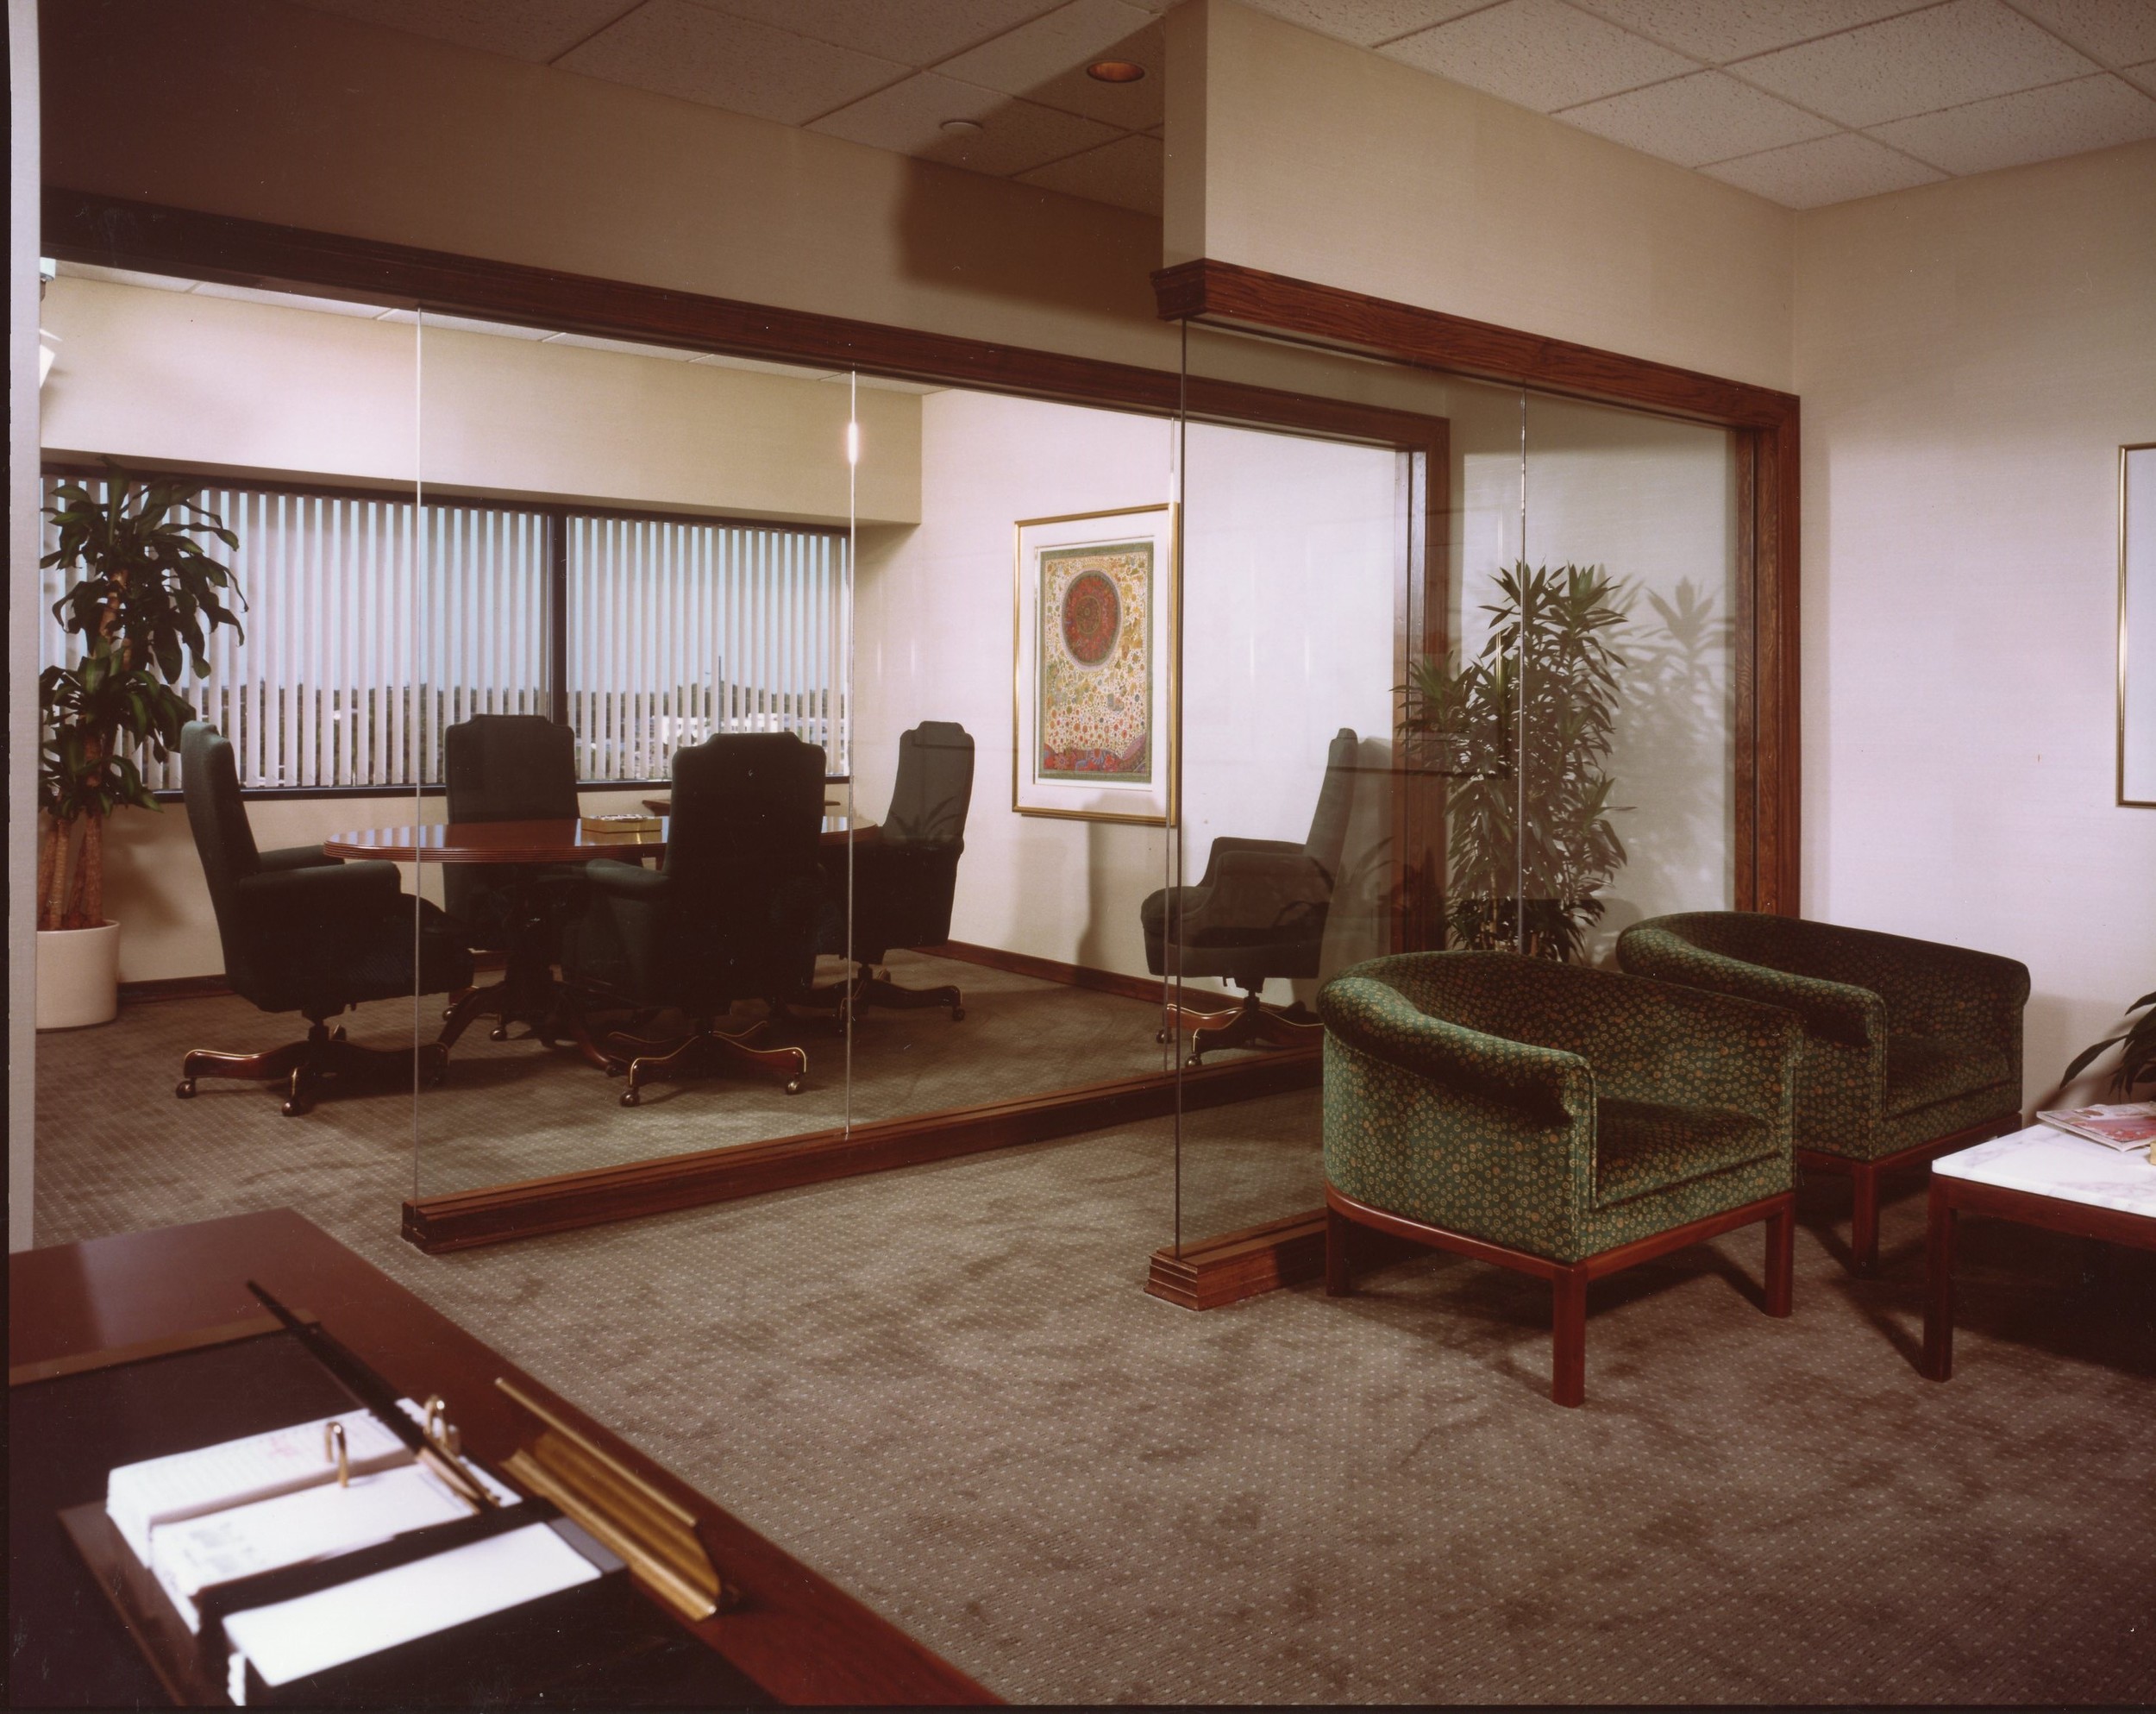 Reception / Conference Room